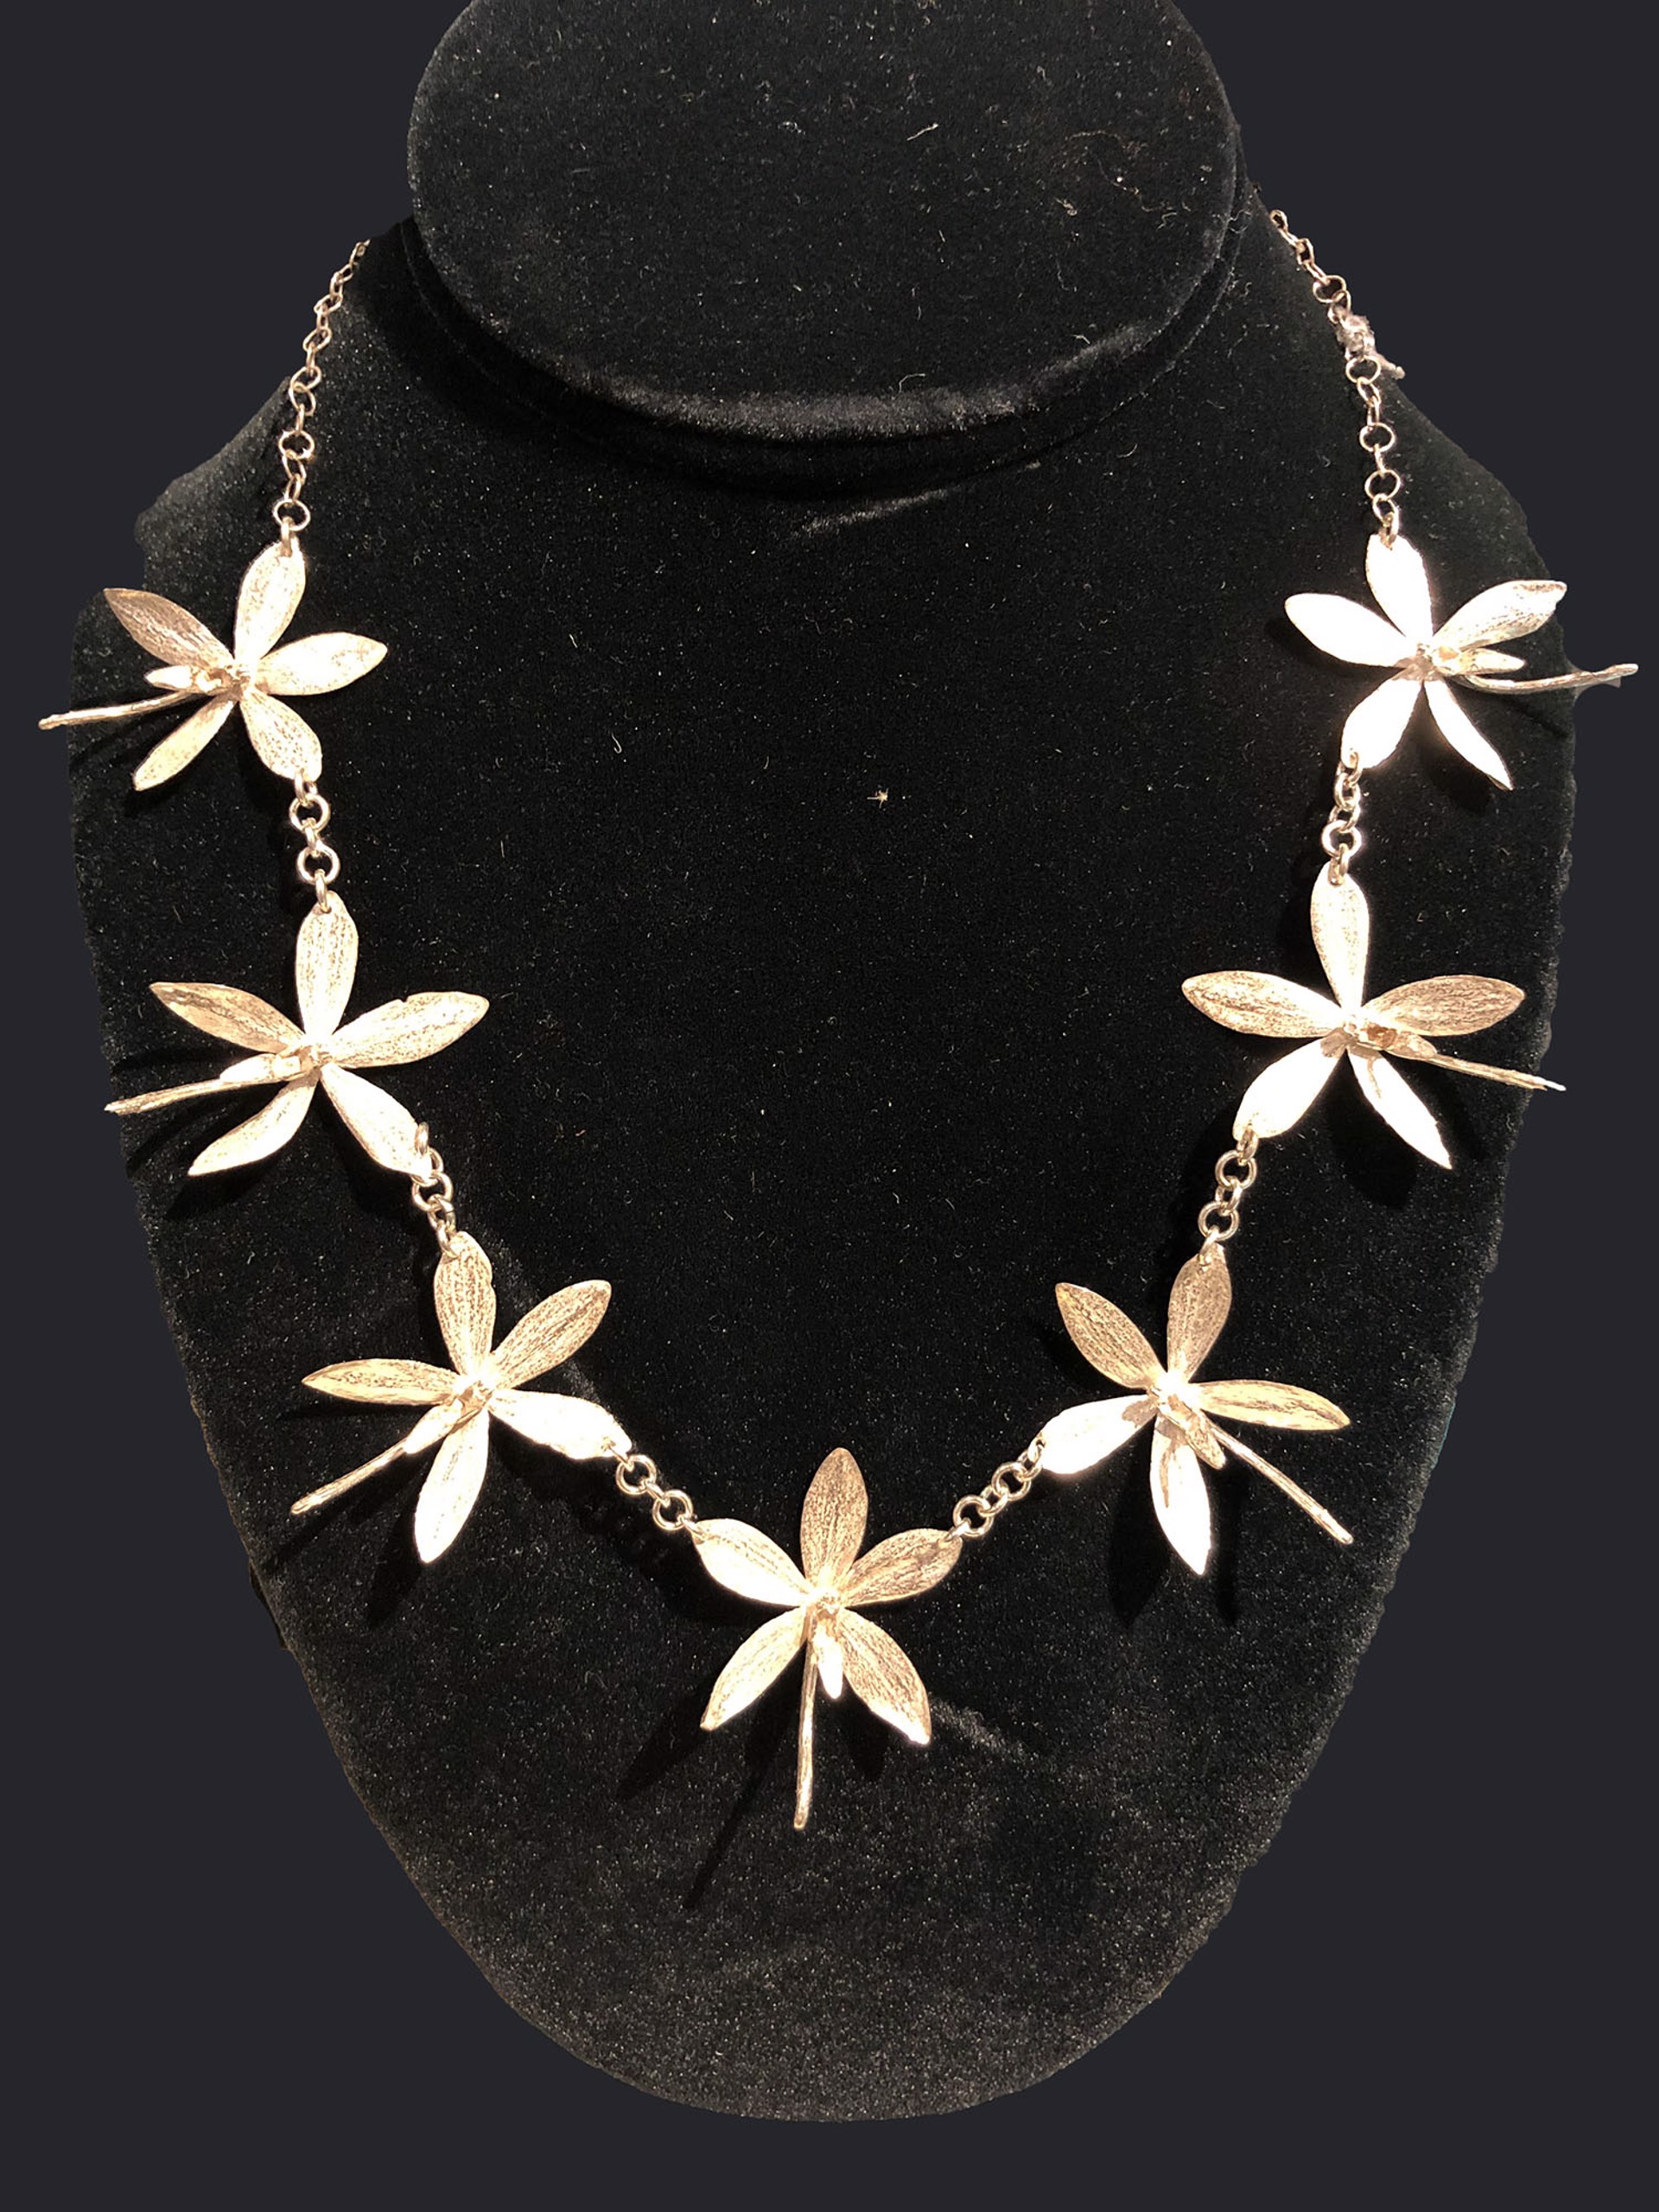 Seven Med Orchid Necklace by Wayne Keeth